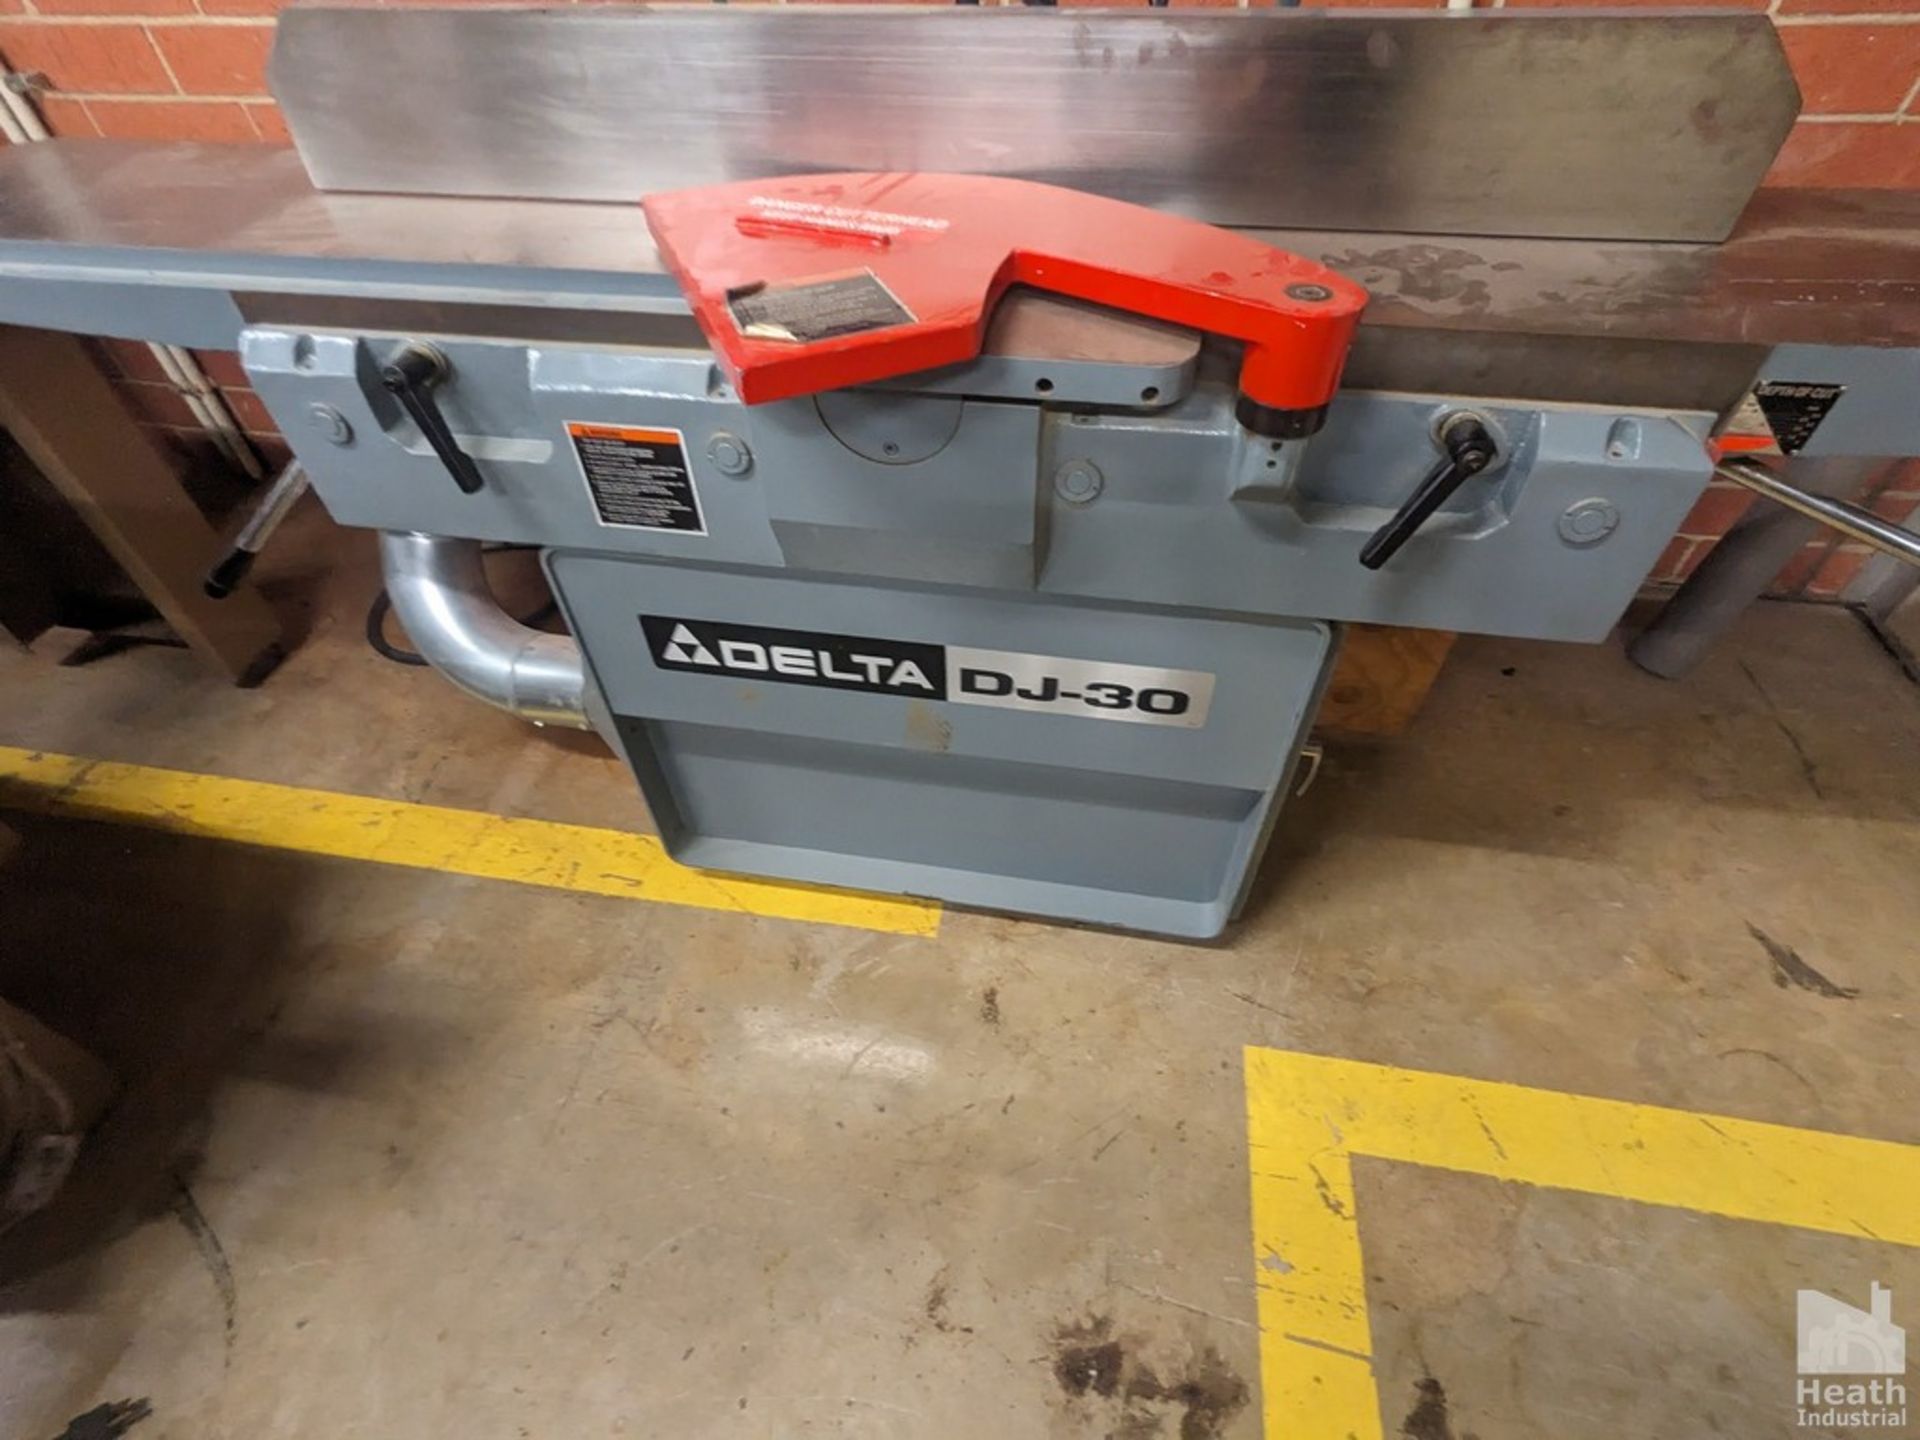 DELTA MODEL 37-360 12" JOINTER S/N CKM00512 Loading Fee :$200 - Image 2 of 5